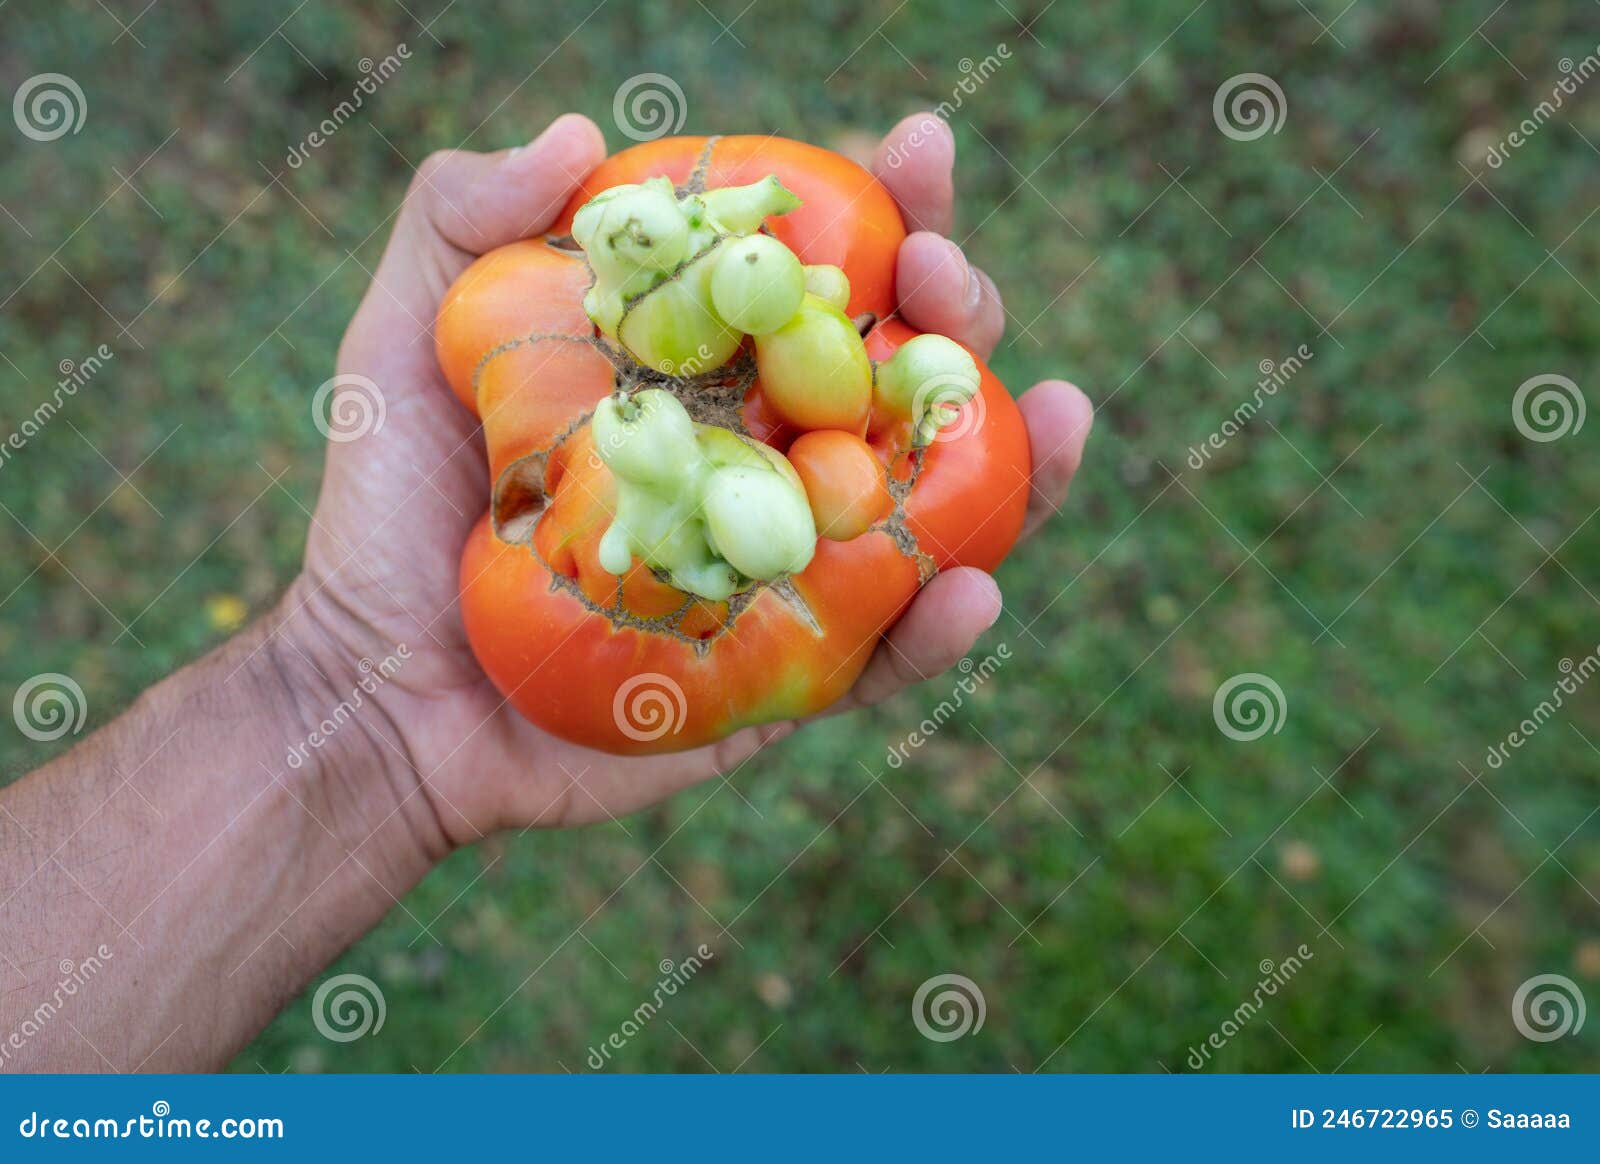 hand holding raw flawed tomato over green